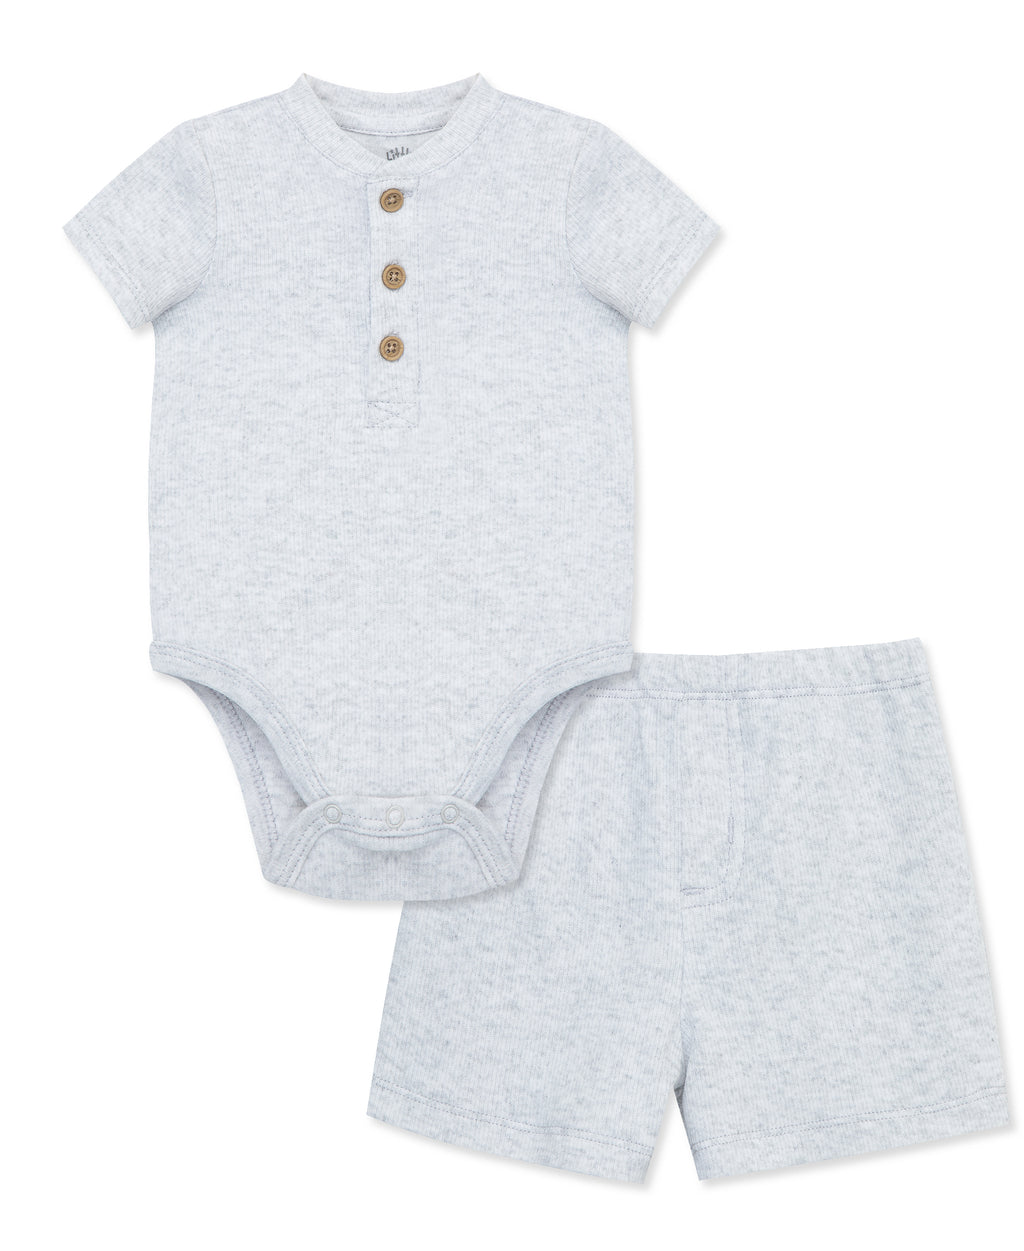 2pcs Baby Boy/Girl Solid Knitted Short-sleeve Top and Shorts Set